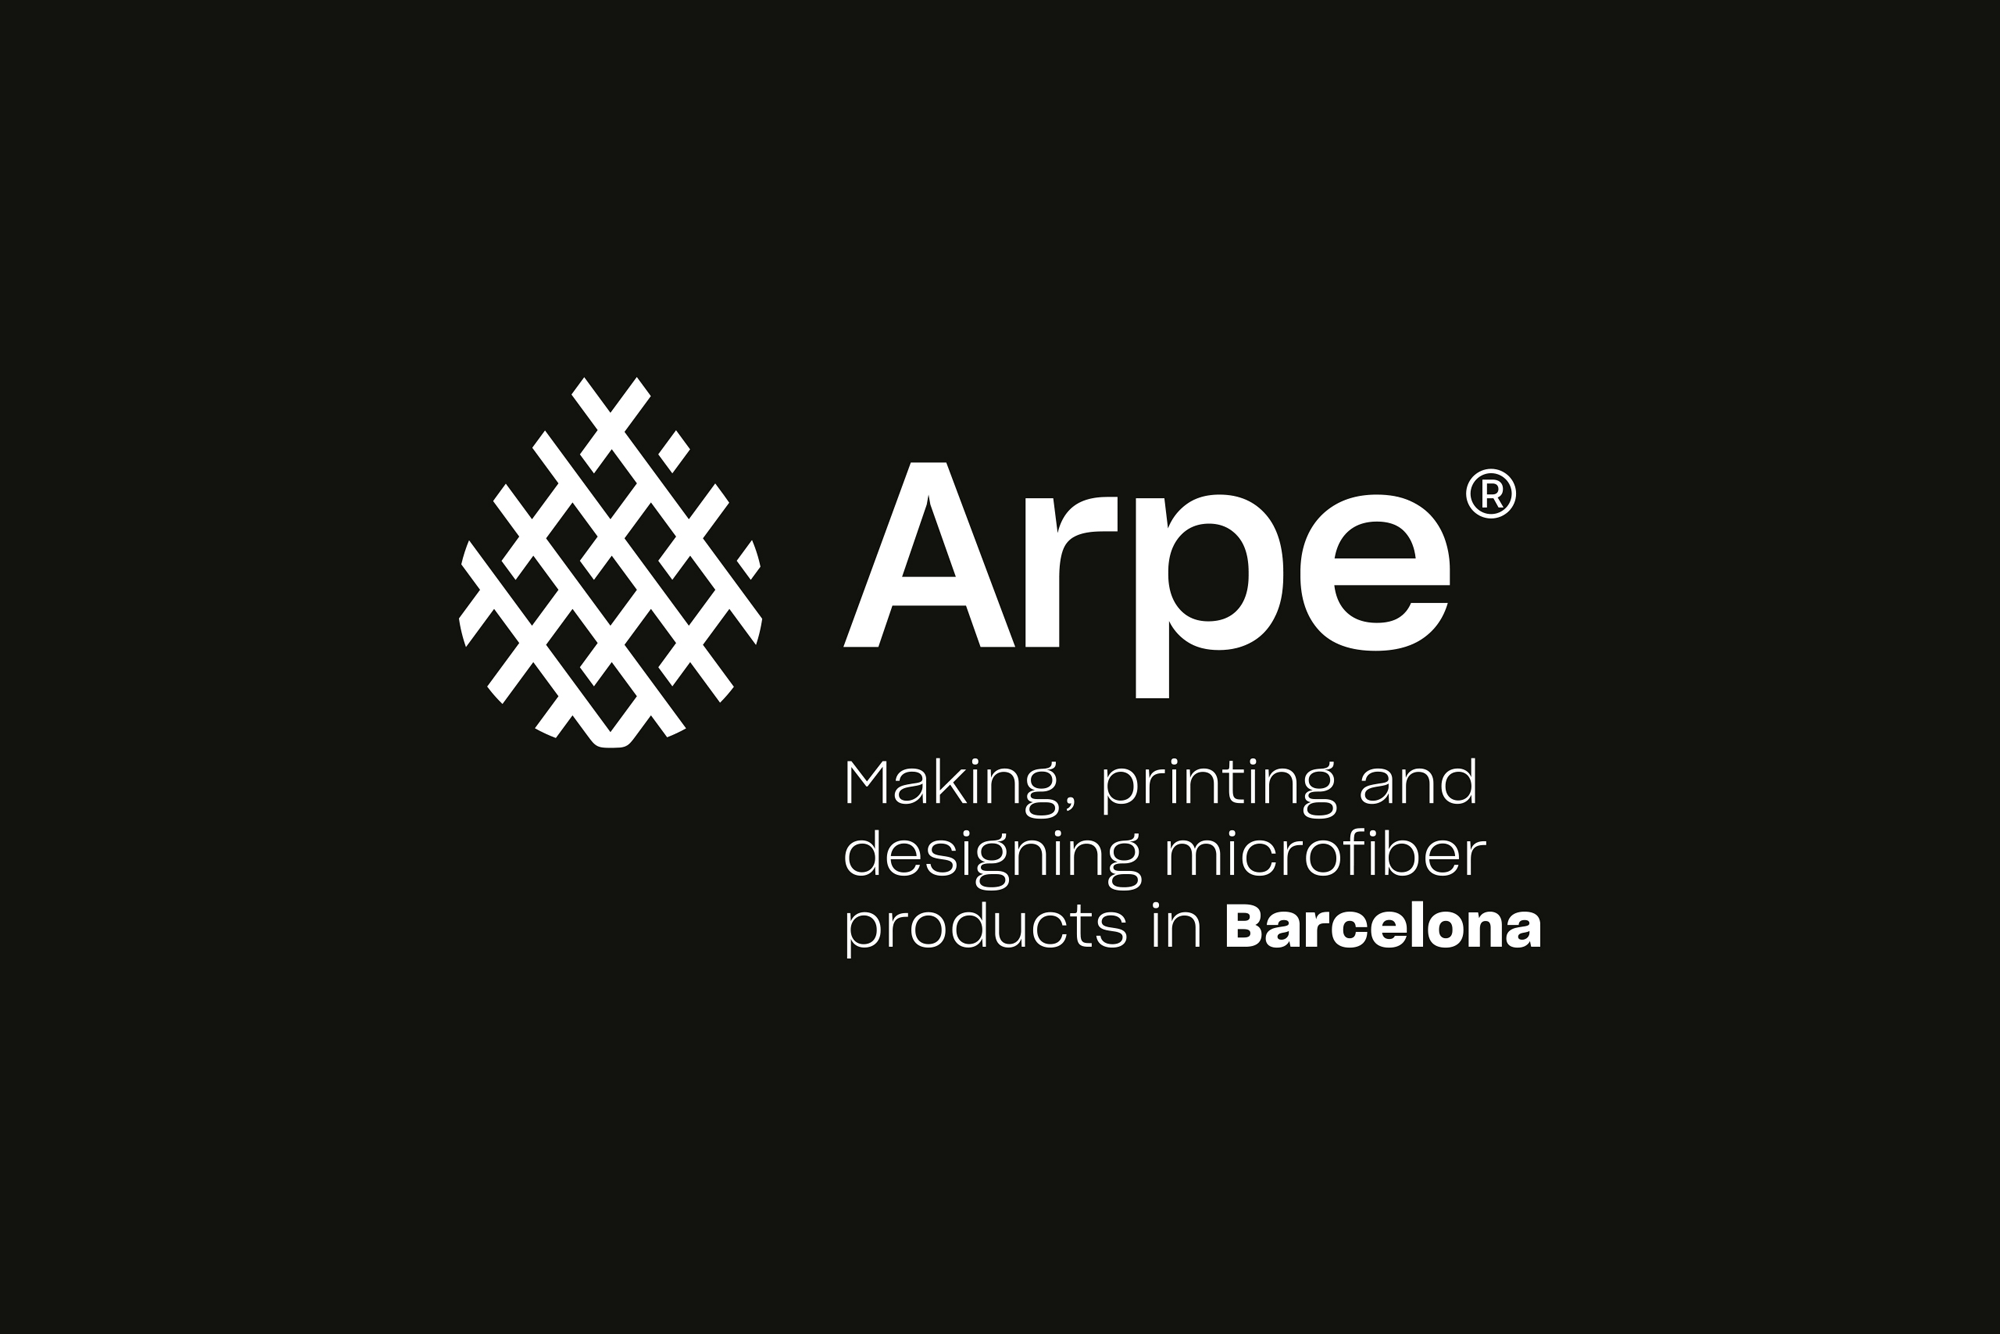 New Logo and Identity for Arpe by Toormix